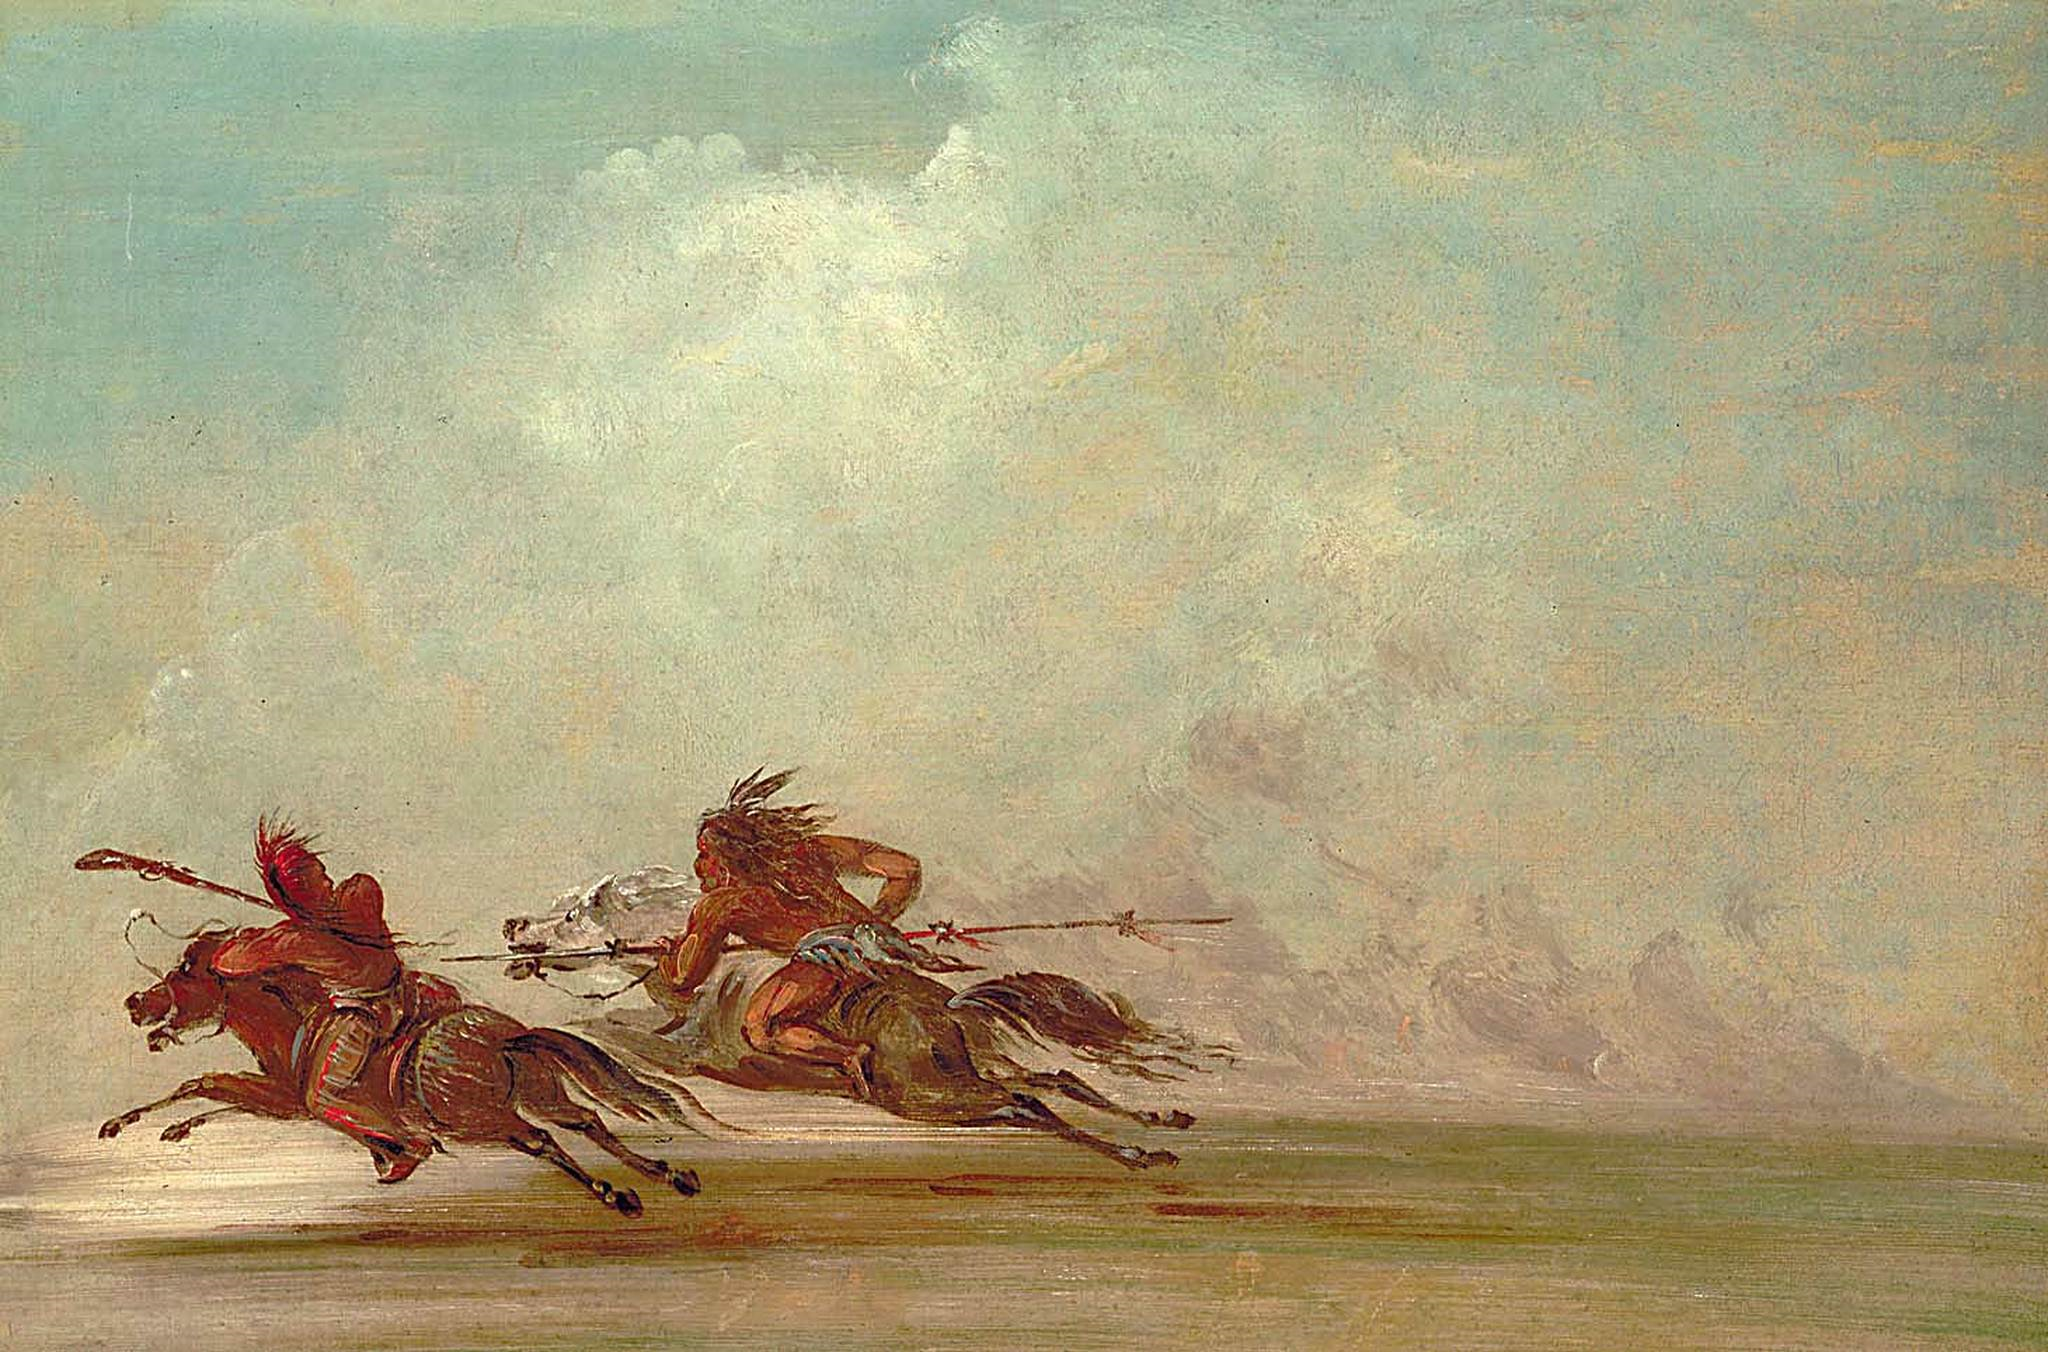 War_on_the_Plains_Comanche_vs_Osage_by_George_Catlin_1834.png